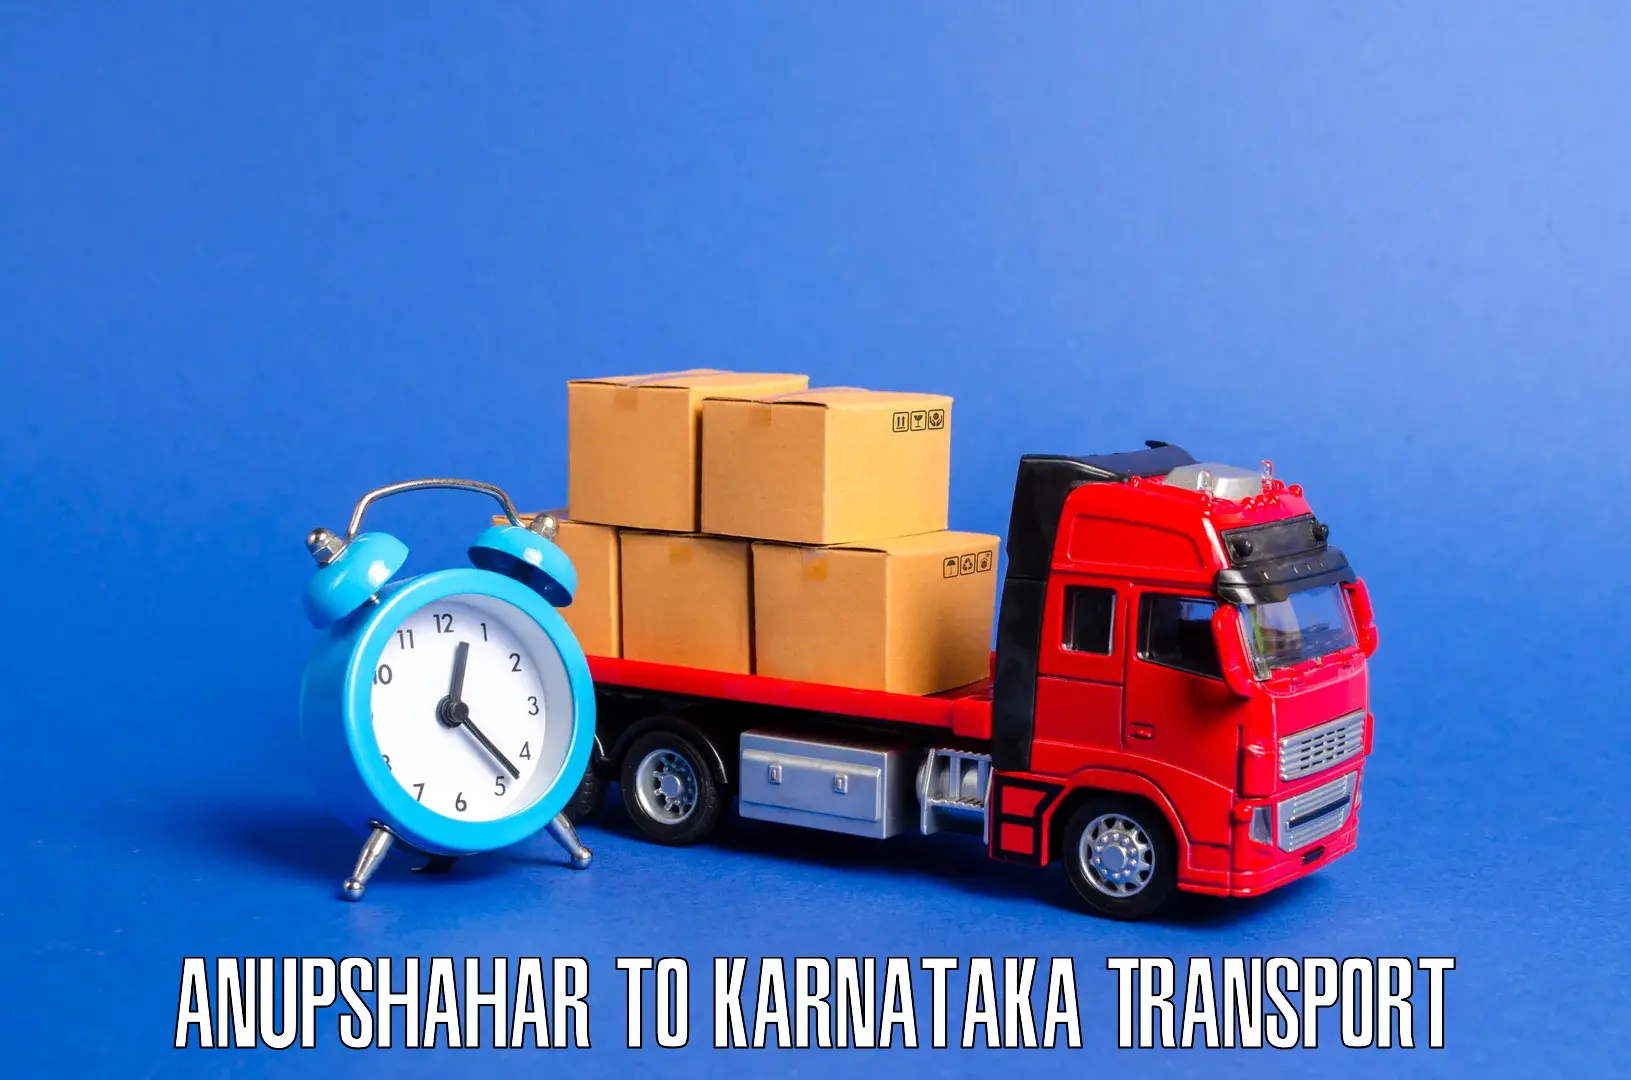 Package delivery services Anupshahar to Kanjarakatte